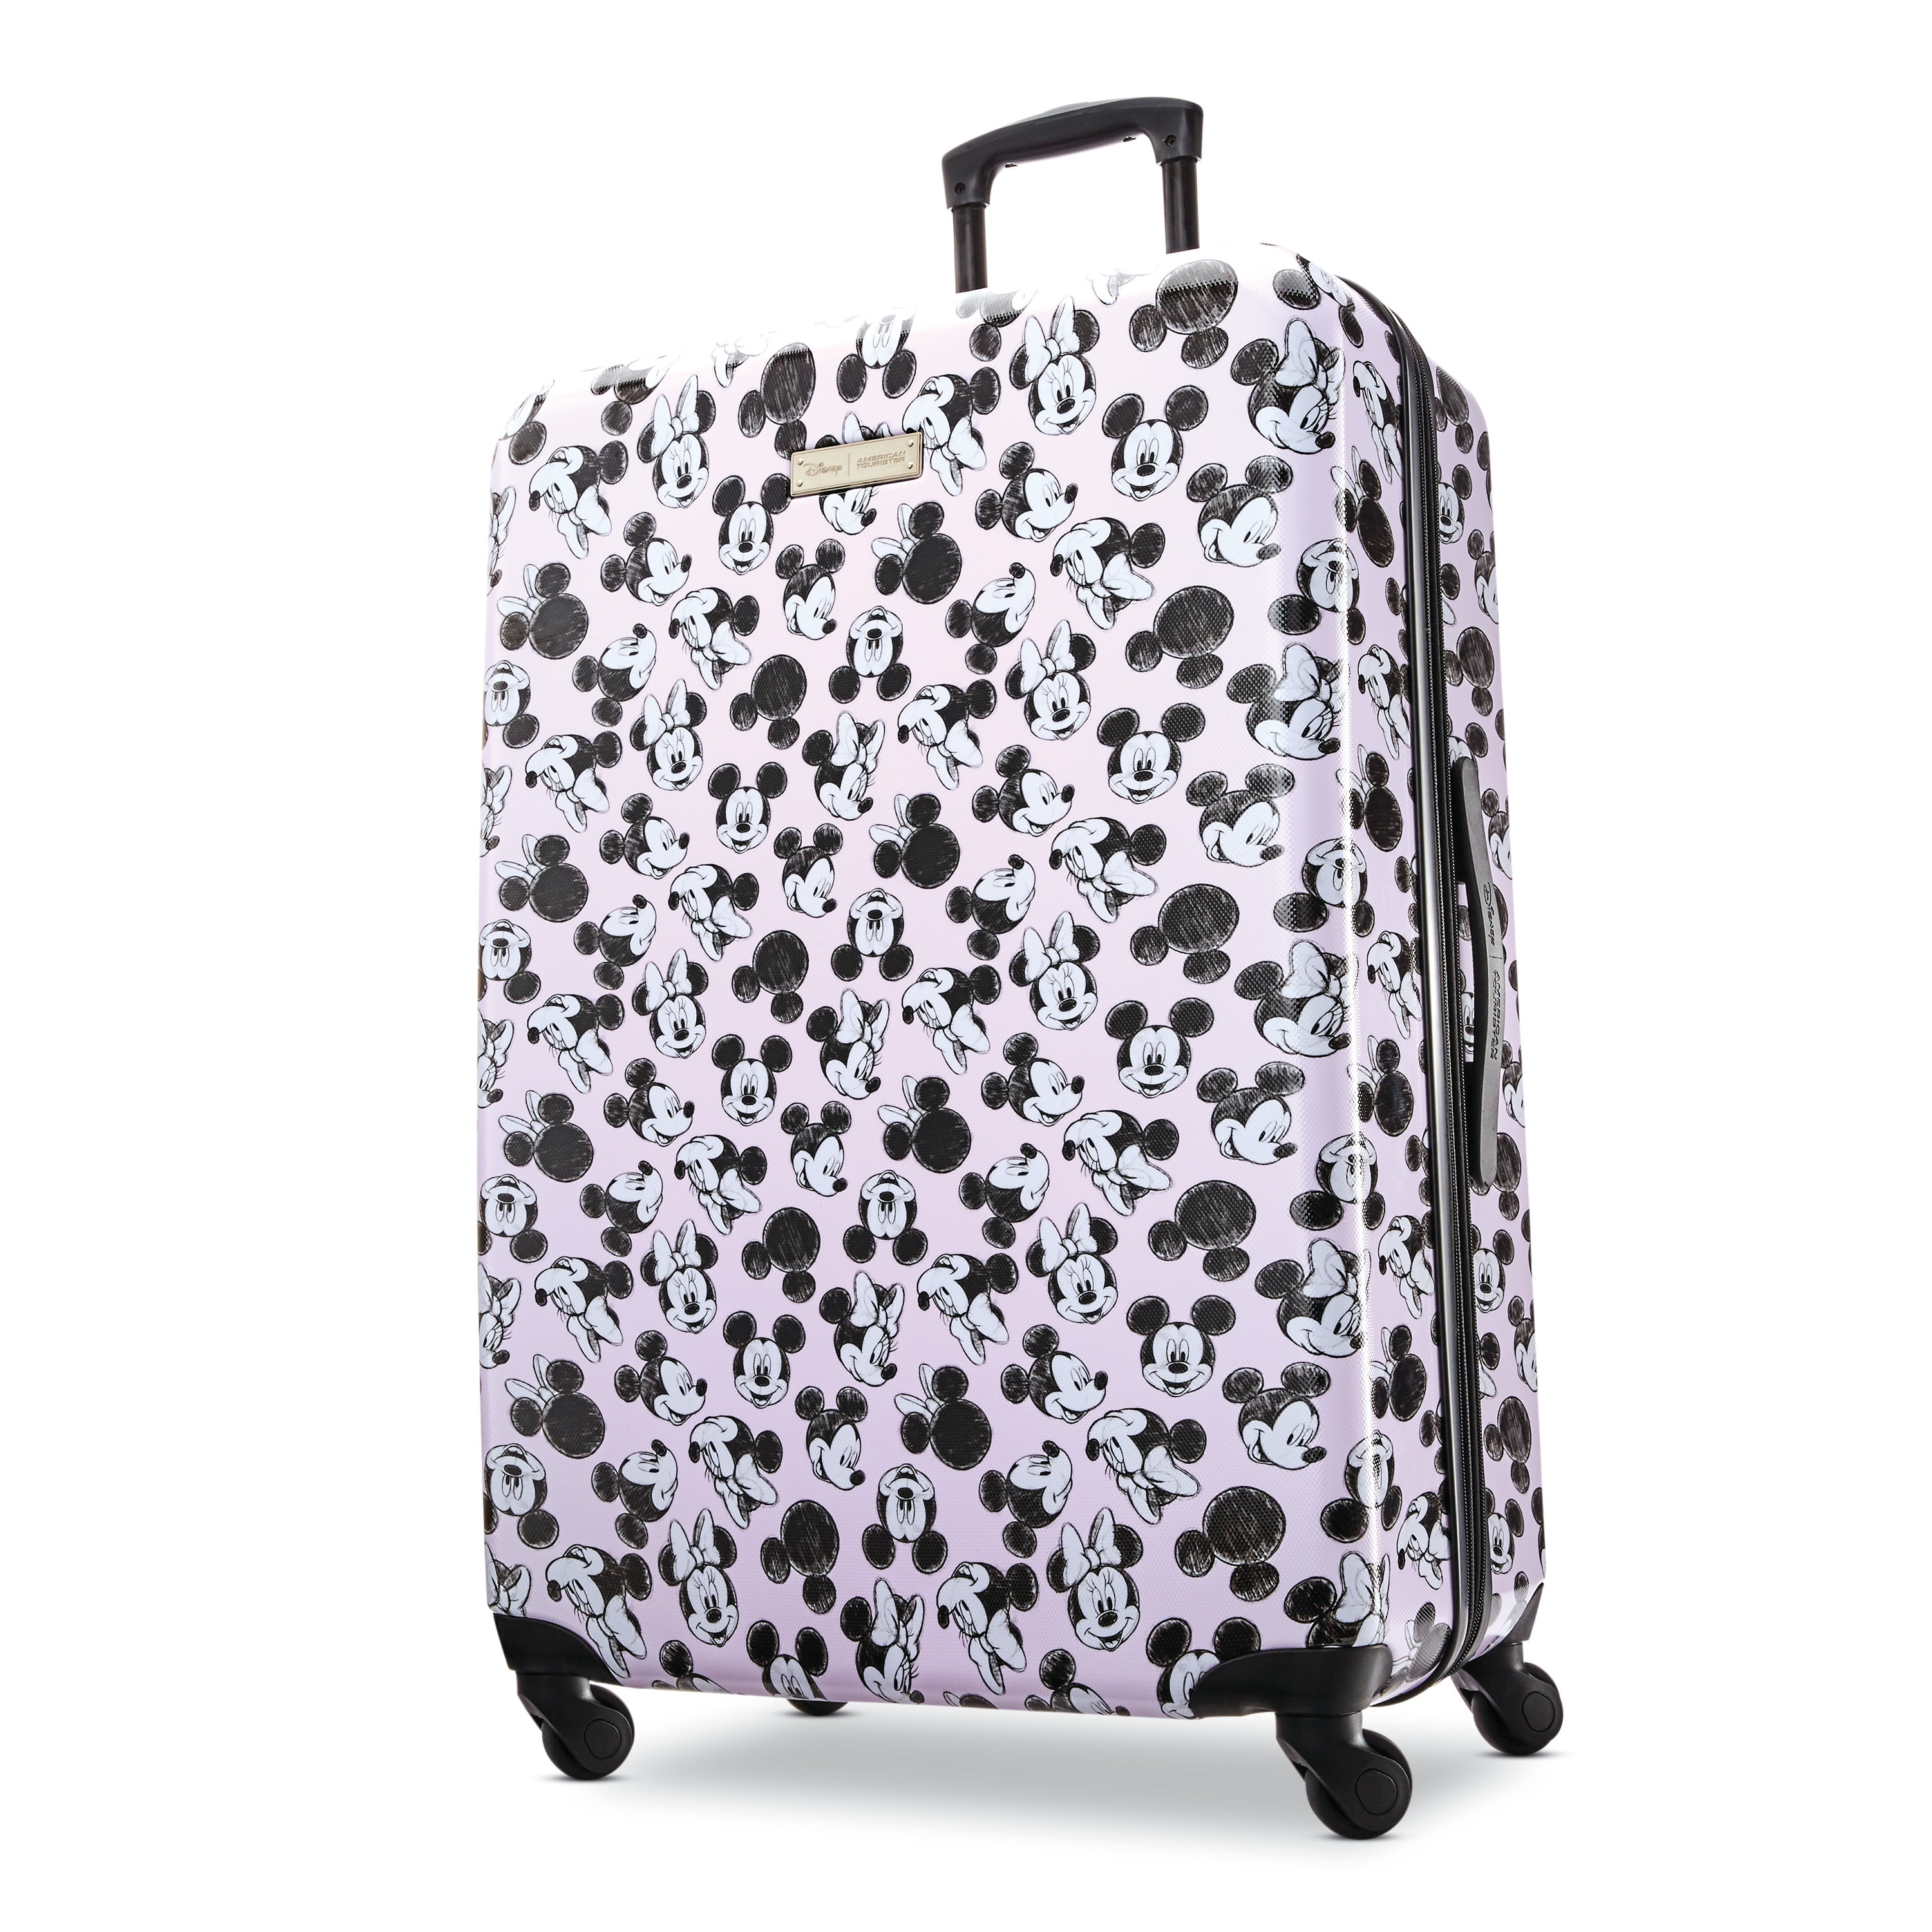 Large 27 1/2 H x 18 1/2 W x 10 1/4 D Disney Mickey Mouse Rolling Luggage 